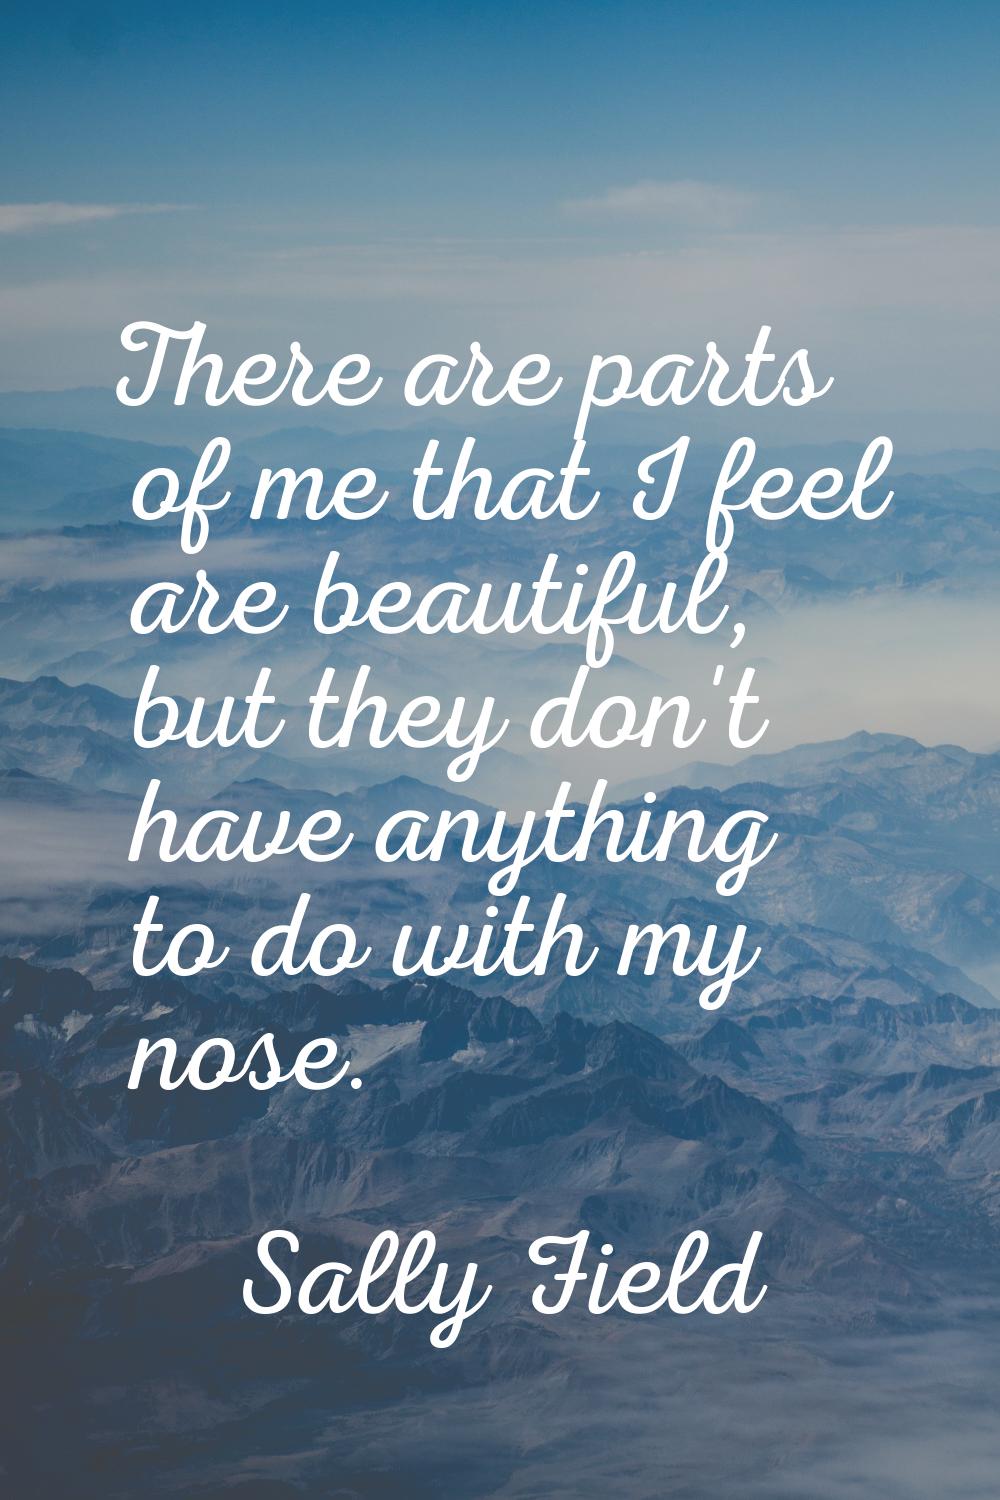 There are parts of me that I feel are beautiful, but they don't have anything to do with my nose.